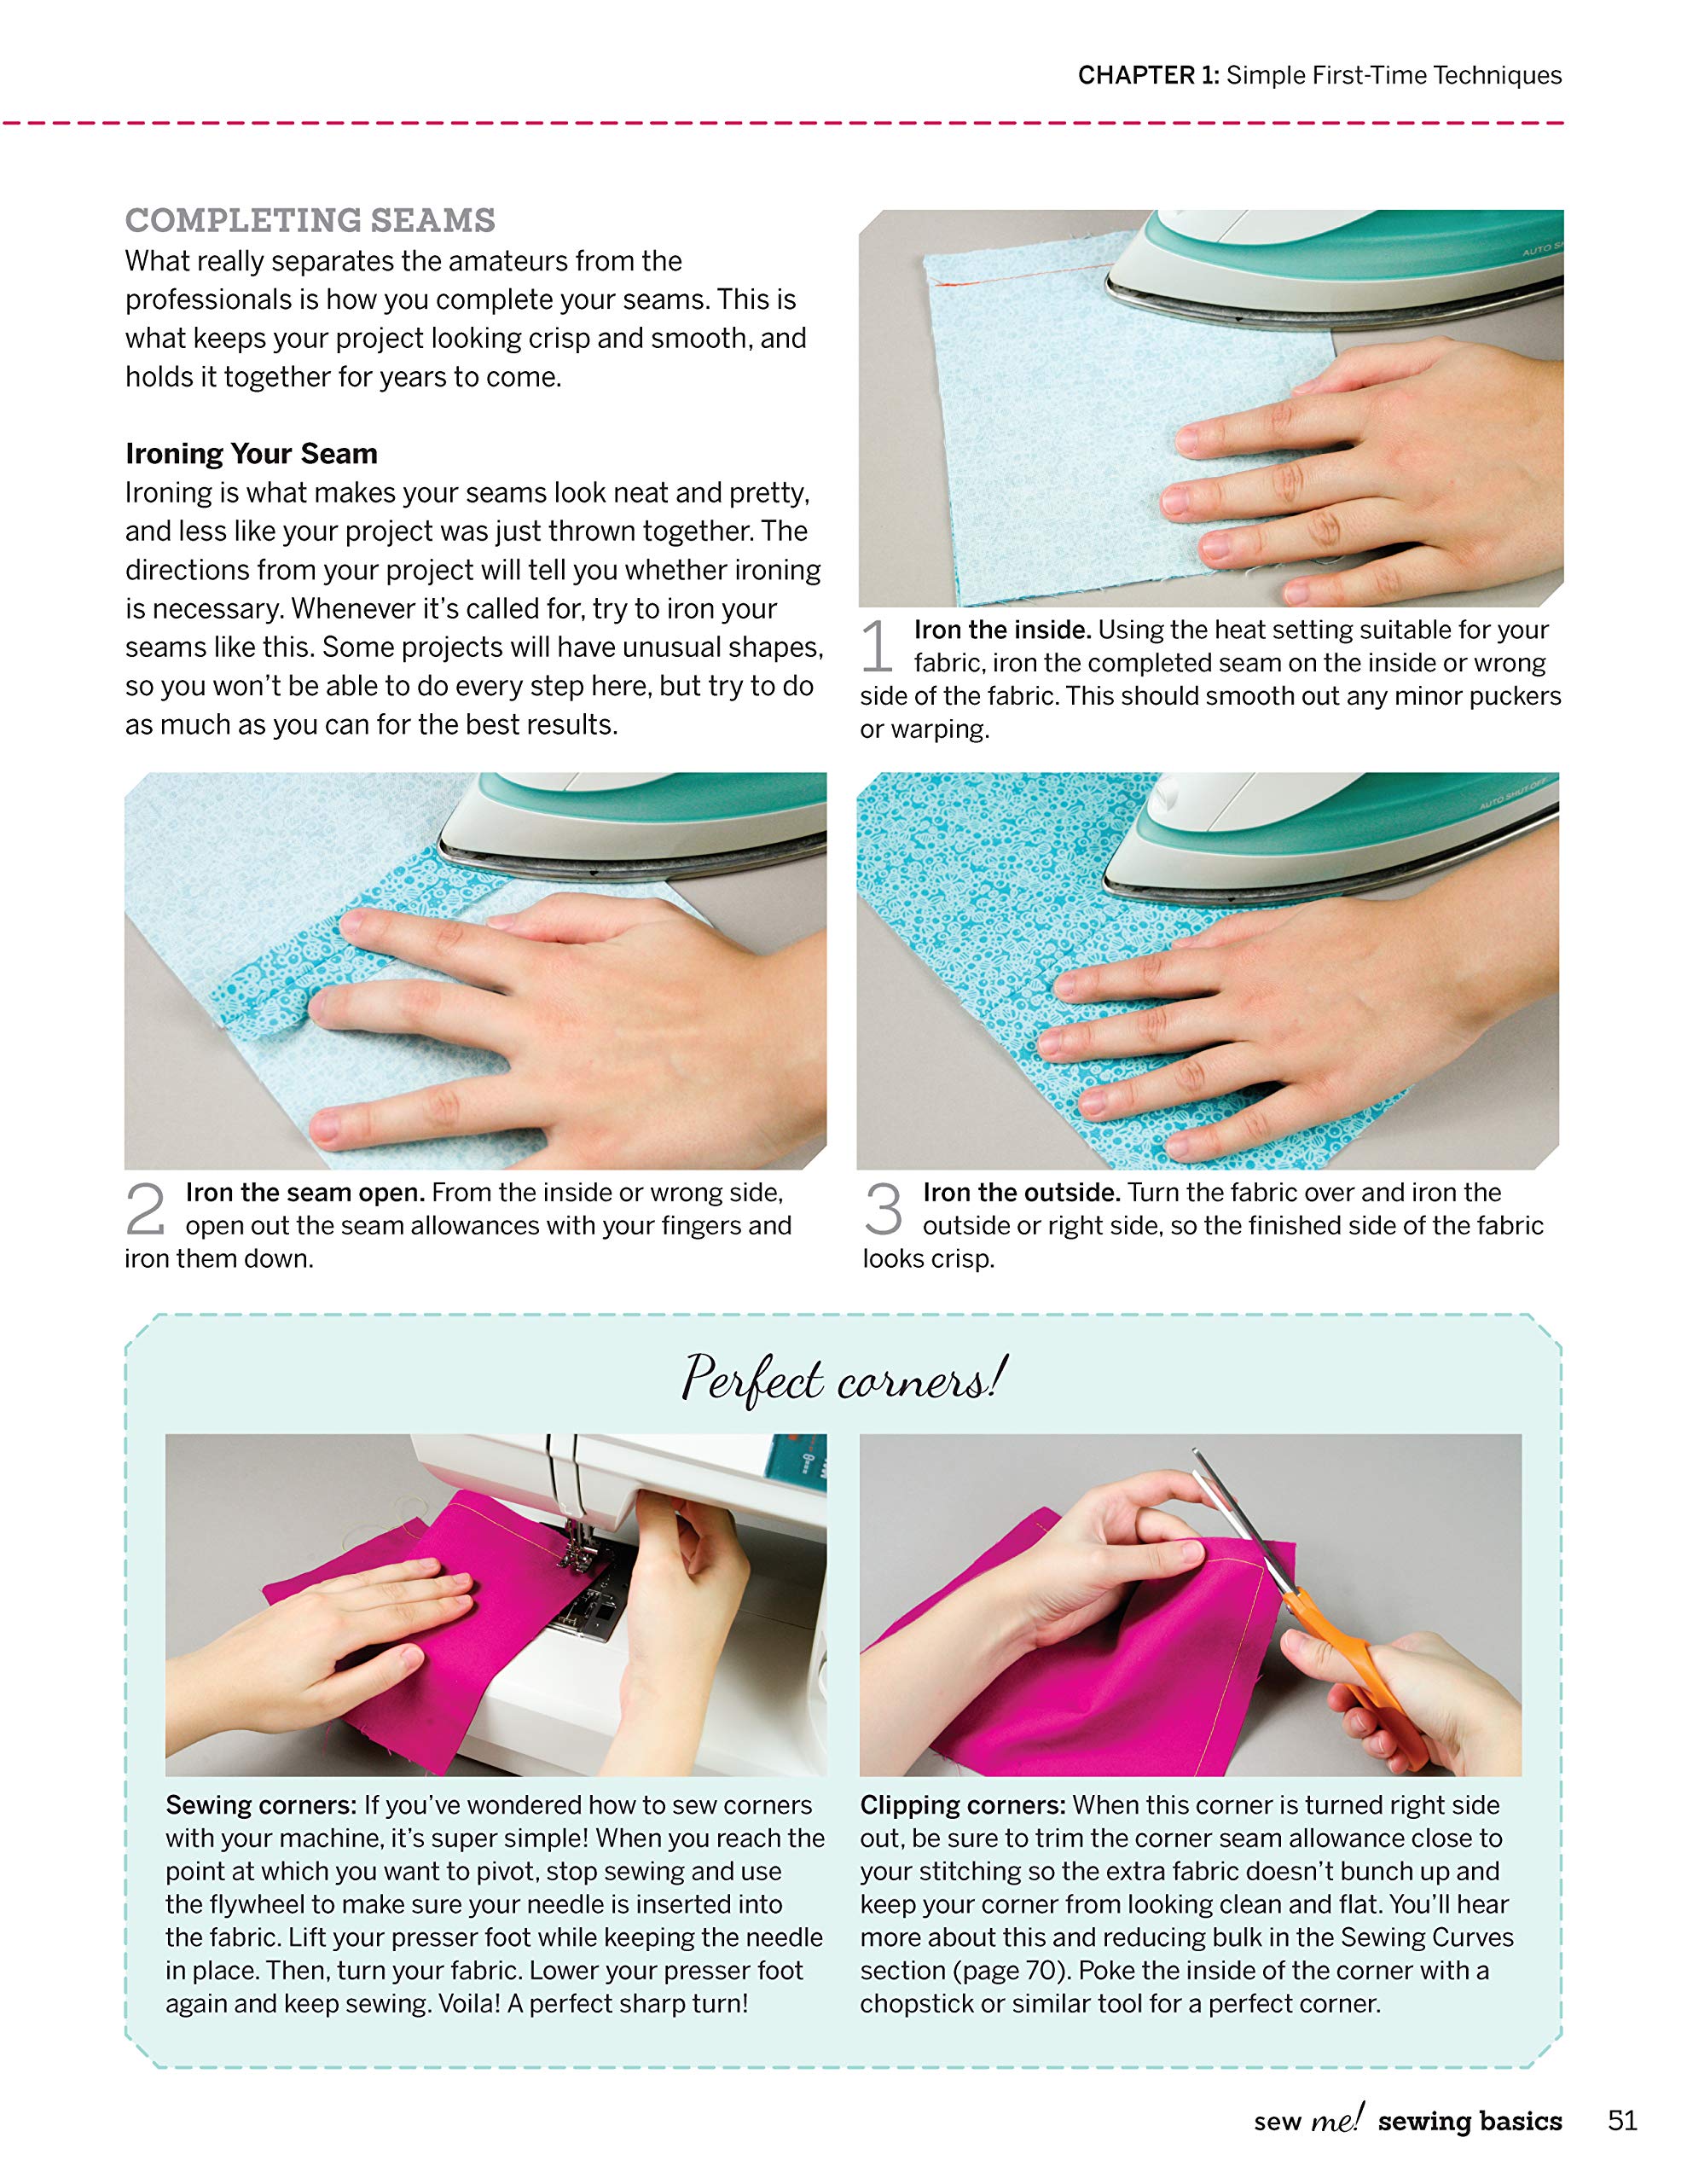 Sew Me! Sewing Basics: Simple Techniques and Projects for First-Time Sewers (Design Originals) Beginner-Friendly Easy-to-Follow Directions to Learn as You Sew, from Sewing Seams to Installing Zippers